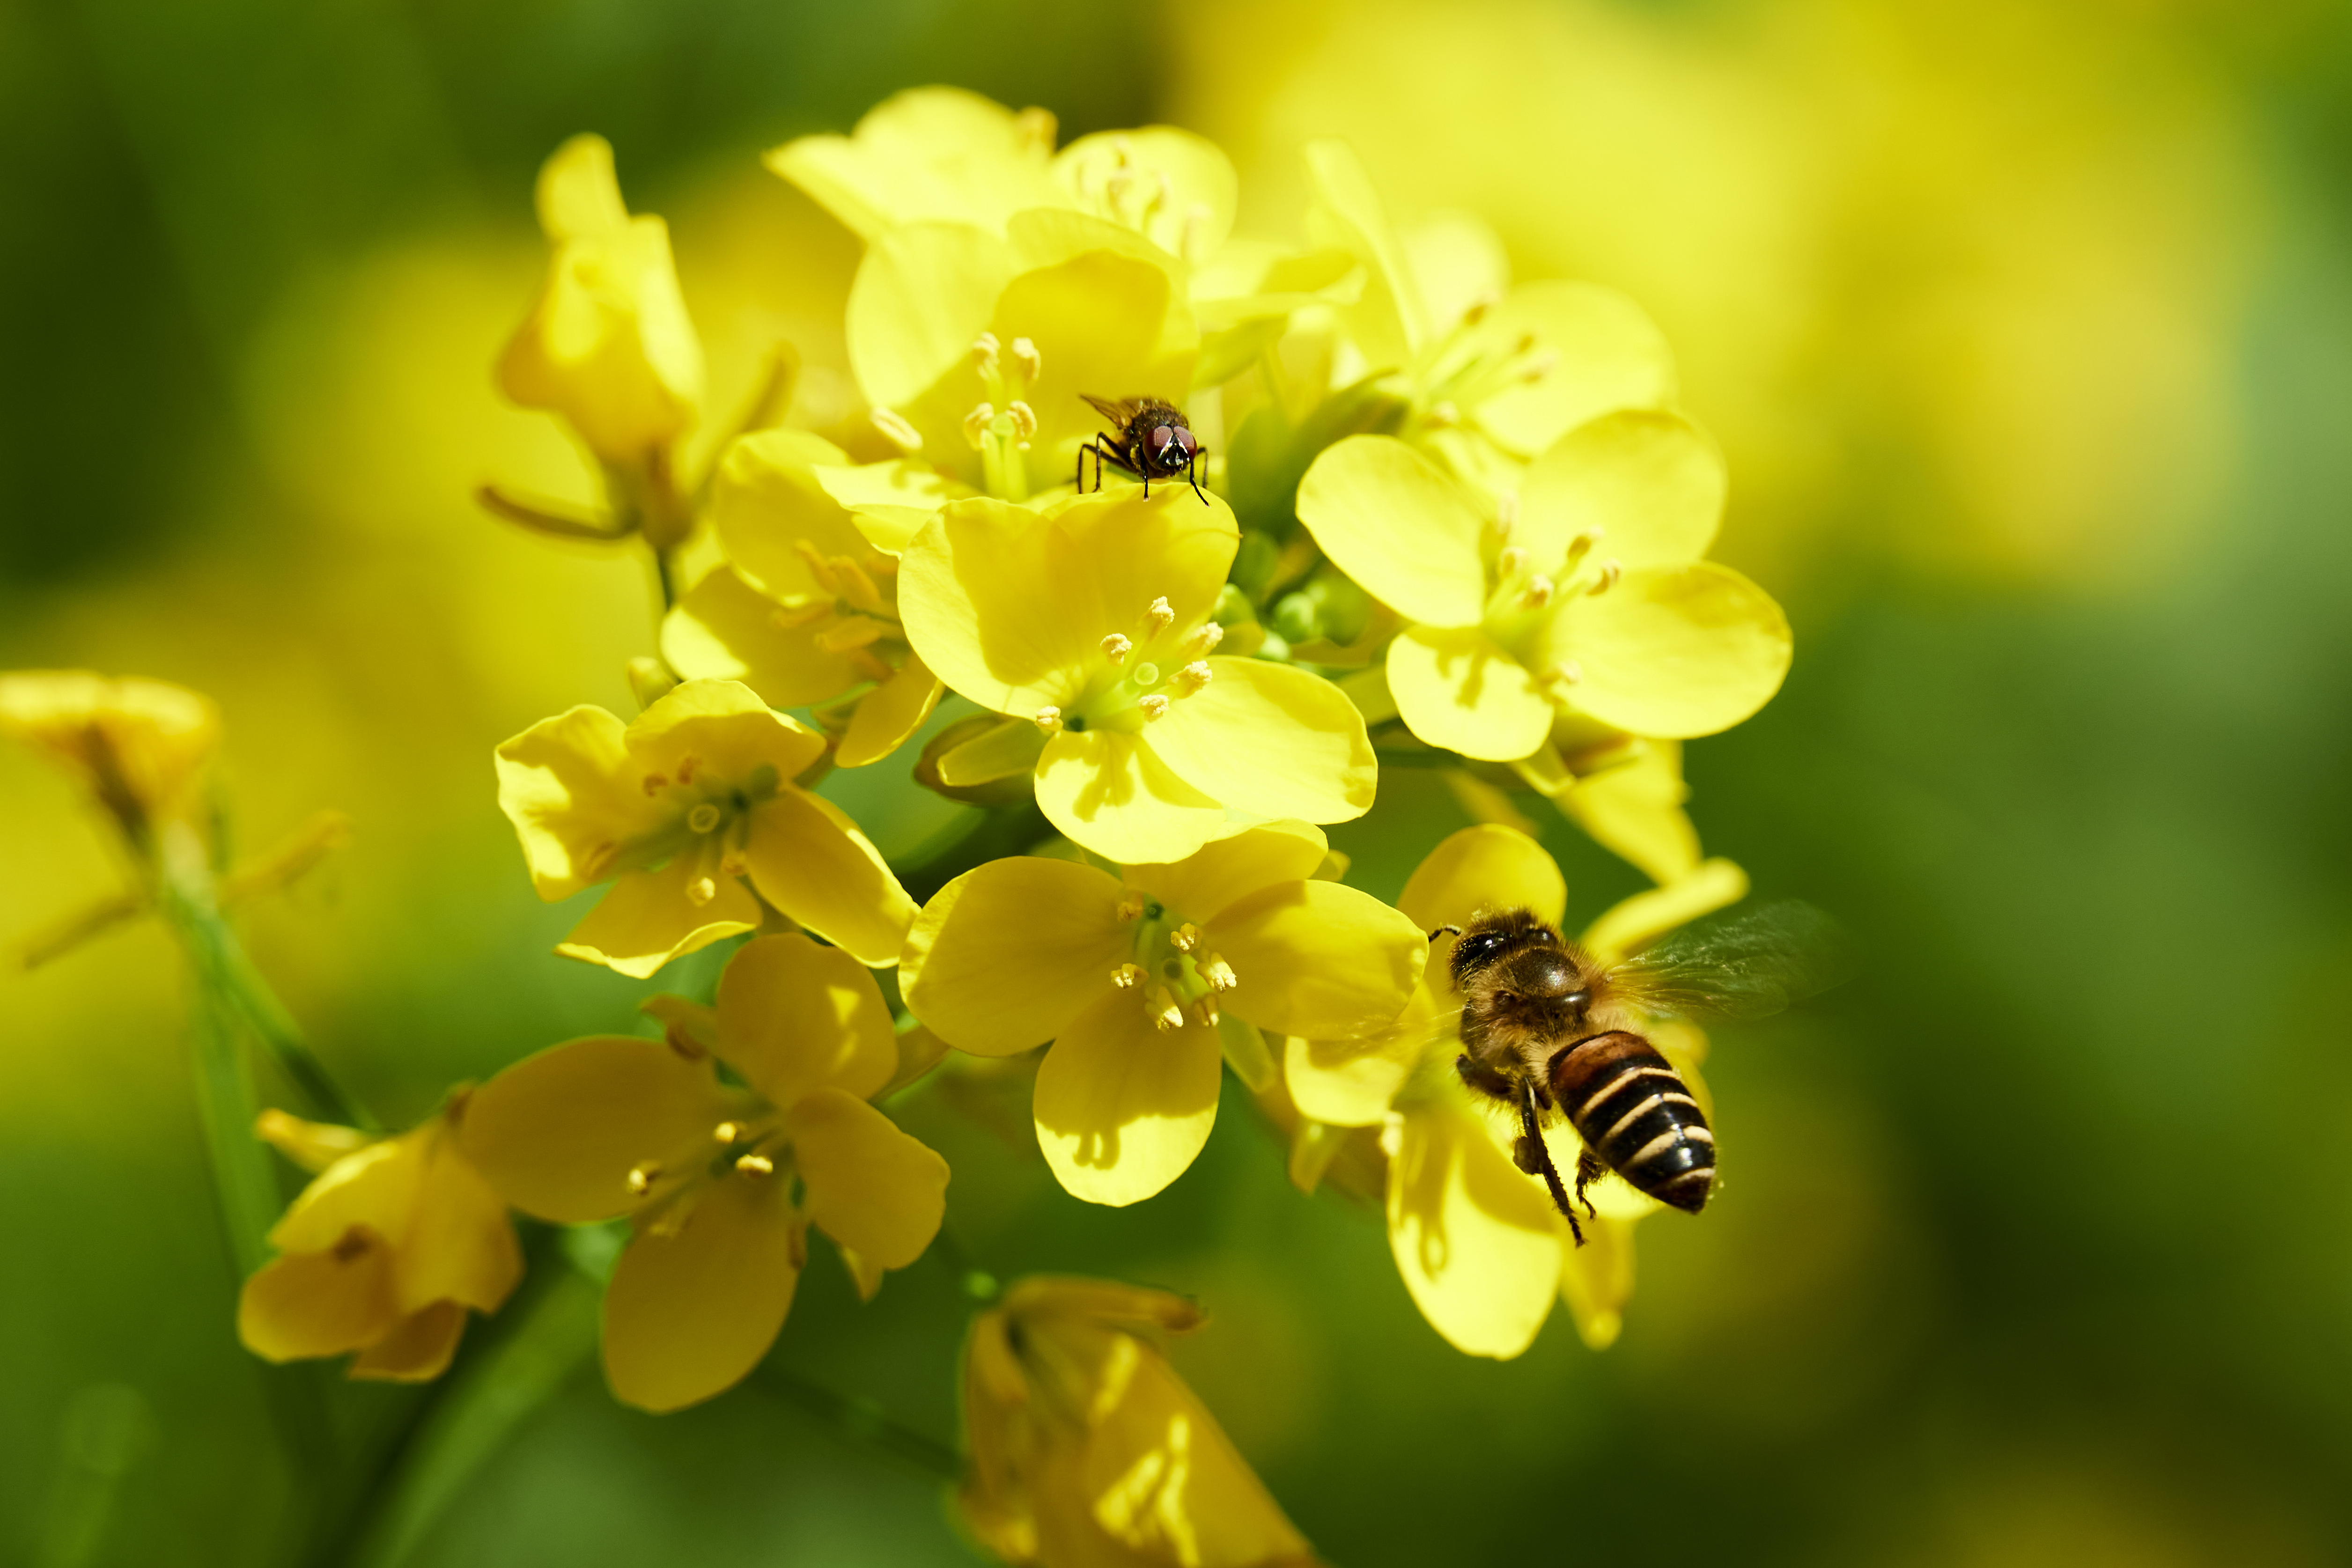 Bees Flowers Nature Blurred Blurry Background Insect Petals 5023x3349